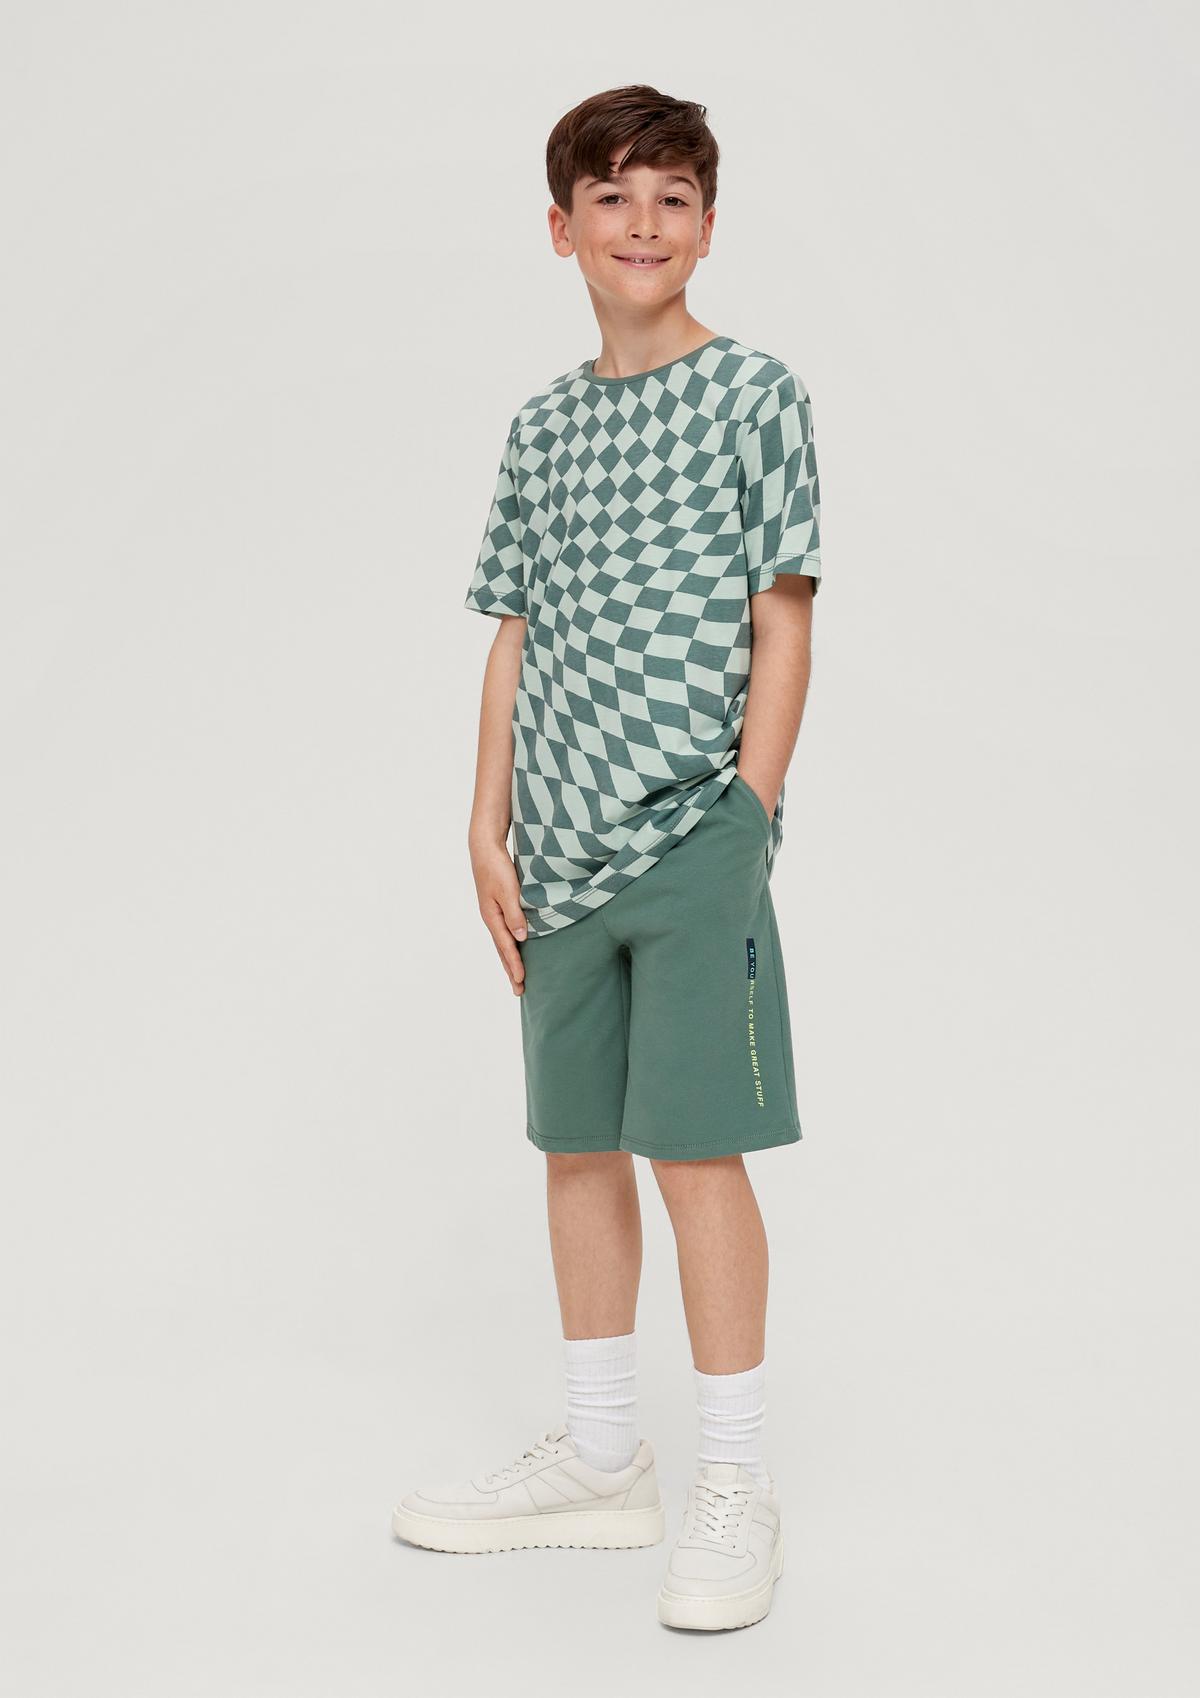 boys teens for and Find online Bermuda shorts